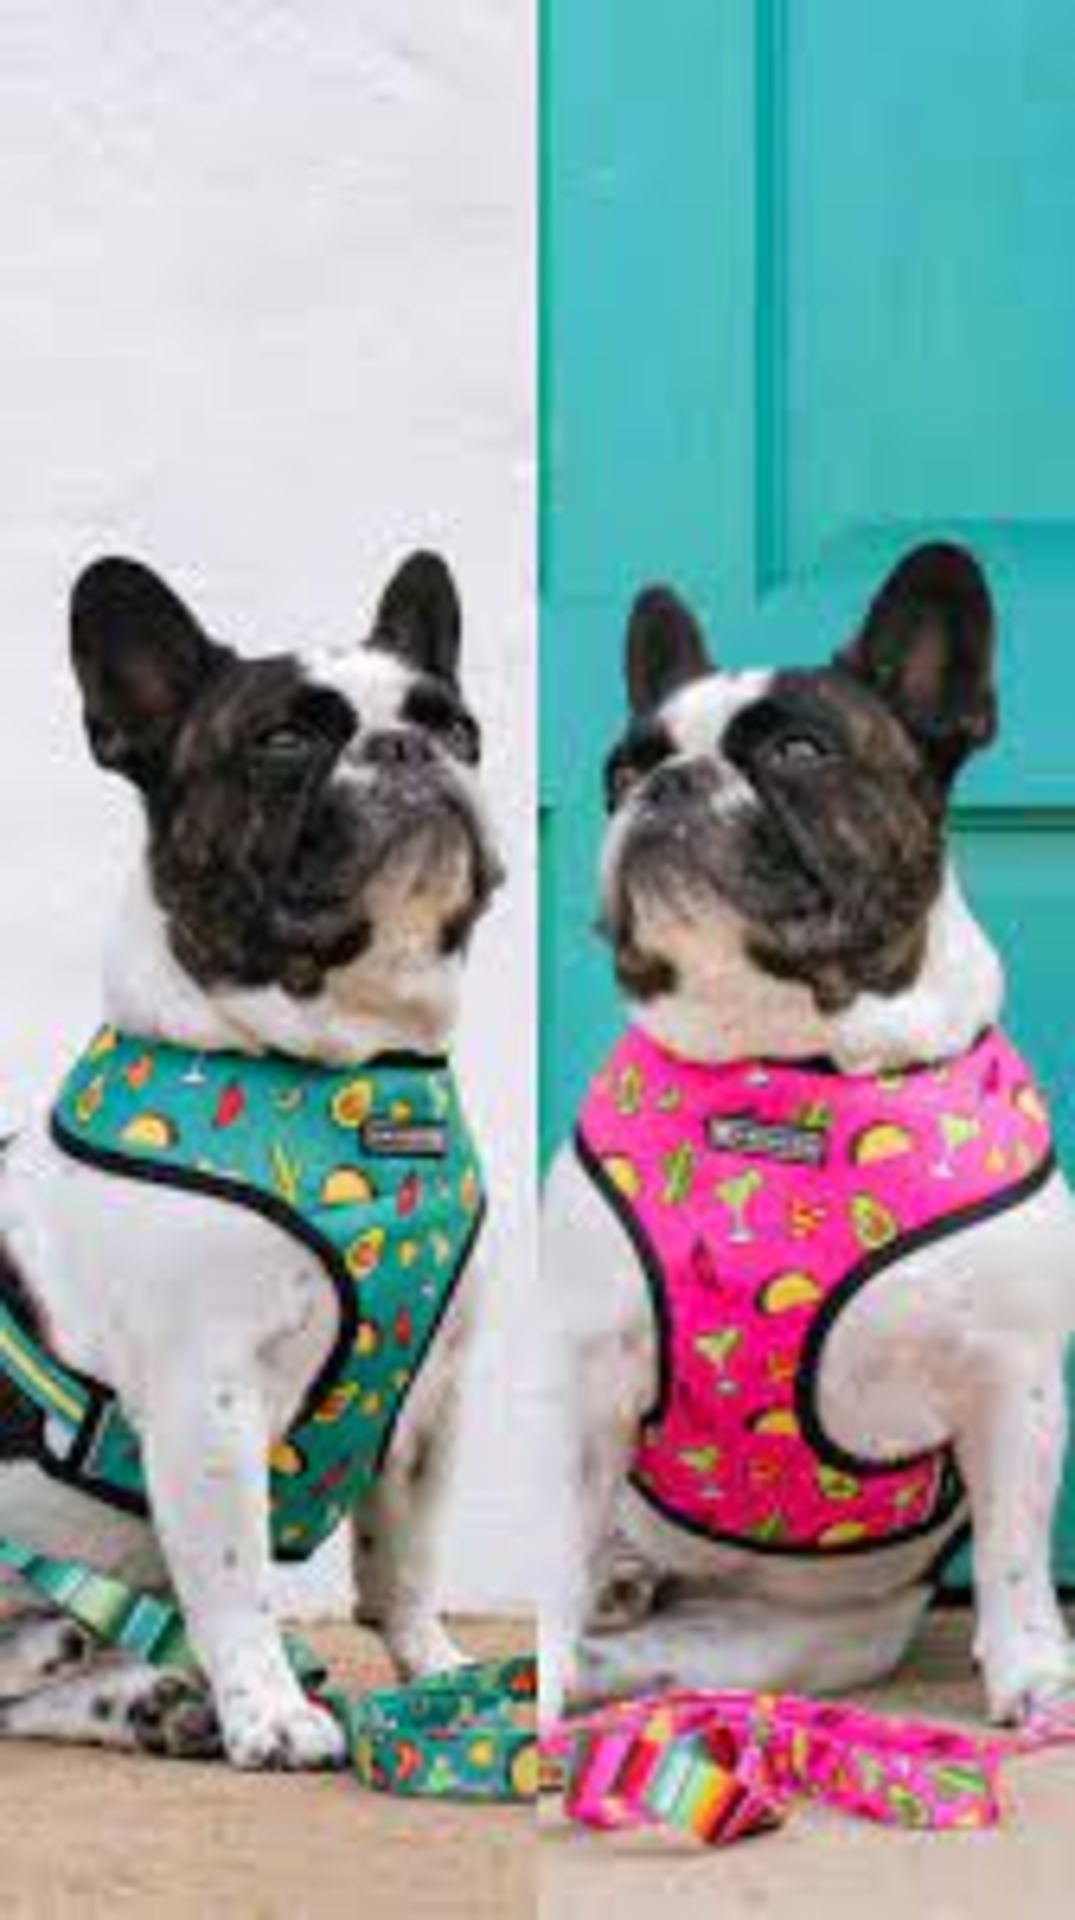 Trade Lot 100 X New .Packaged Frenchie The Bulldog Luxury Branded Dog Products. May include items - Image 13 of 50